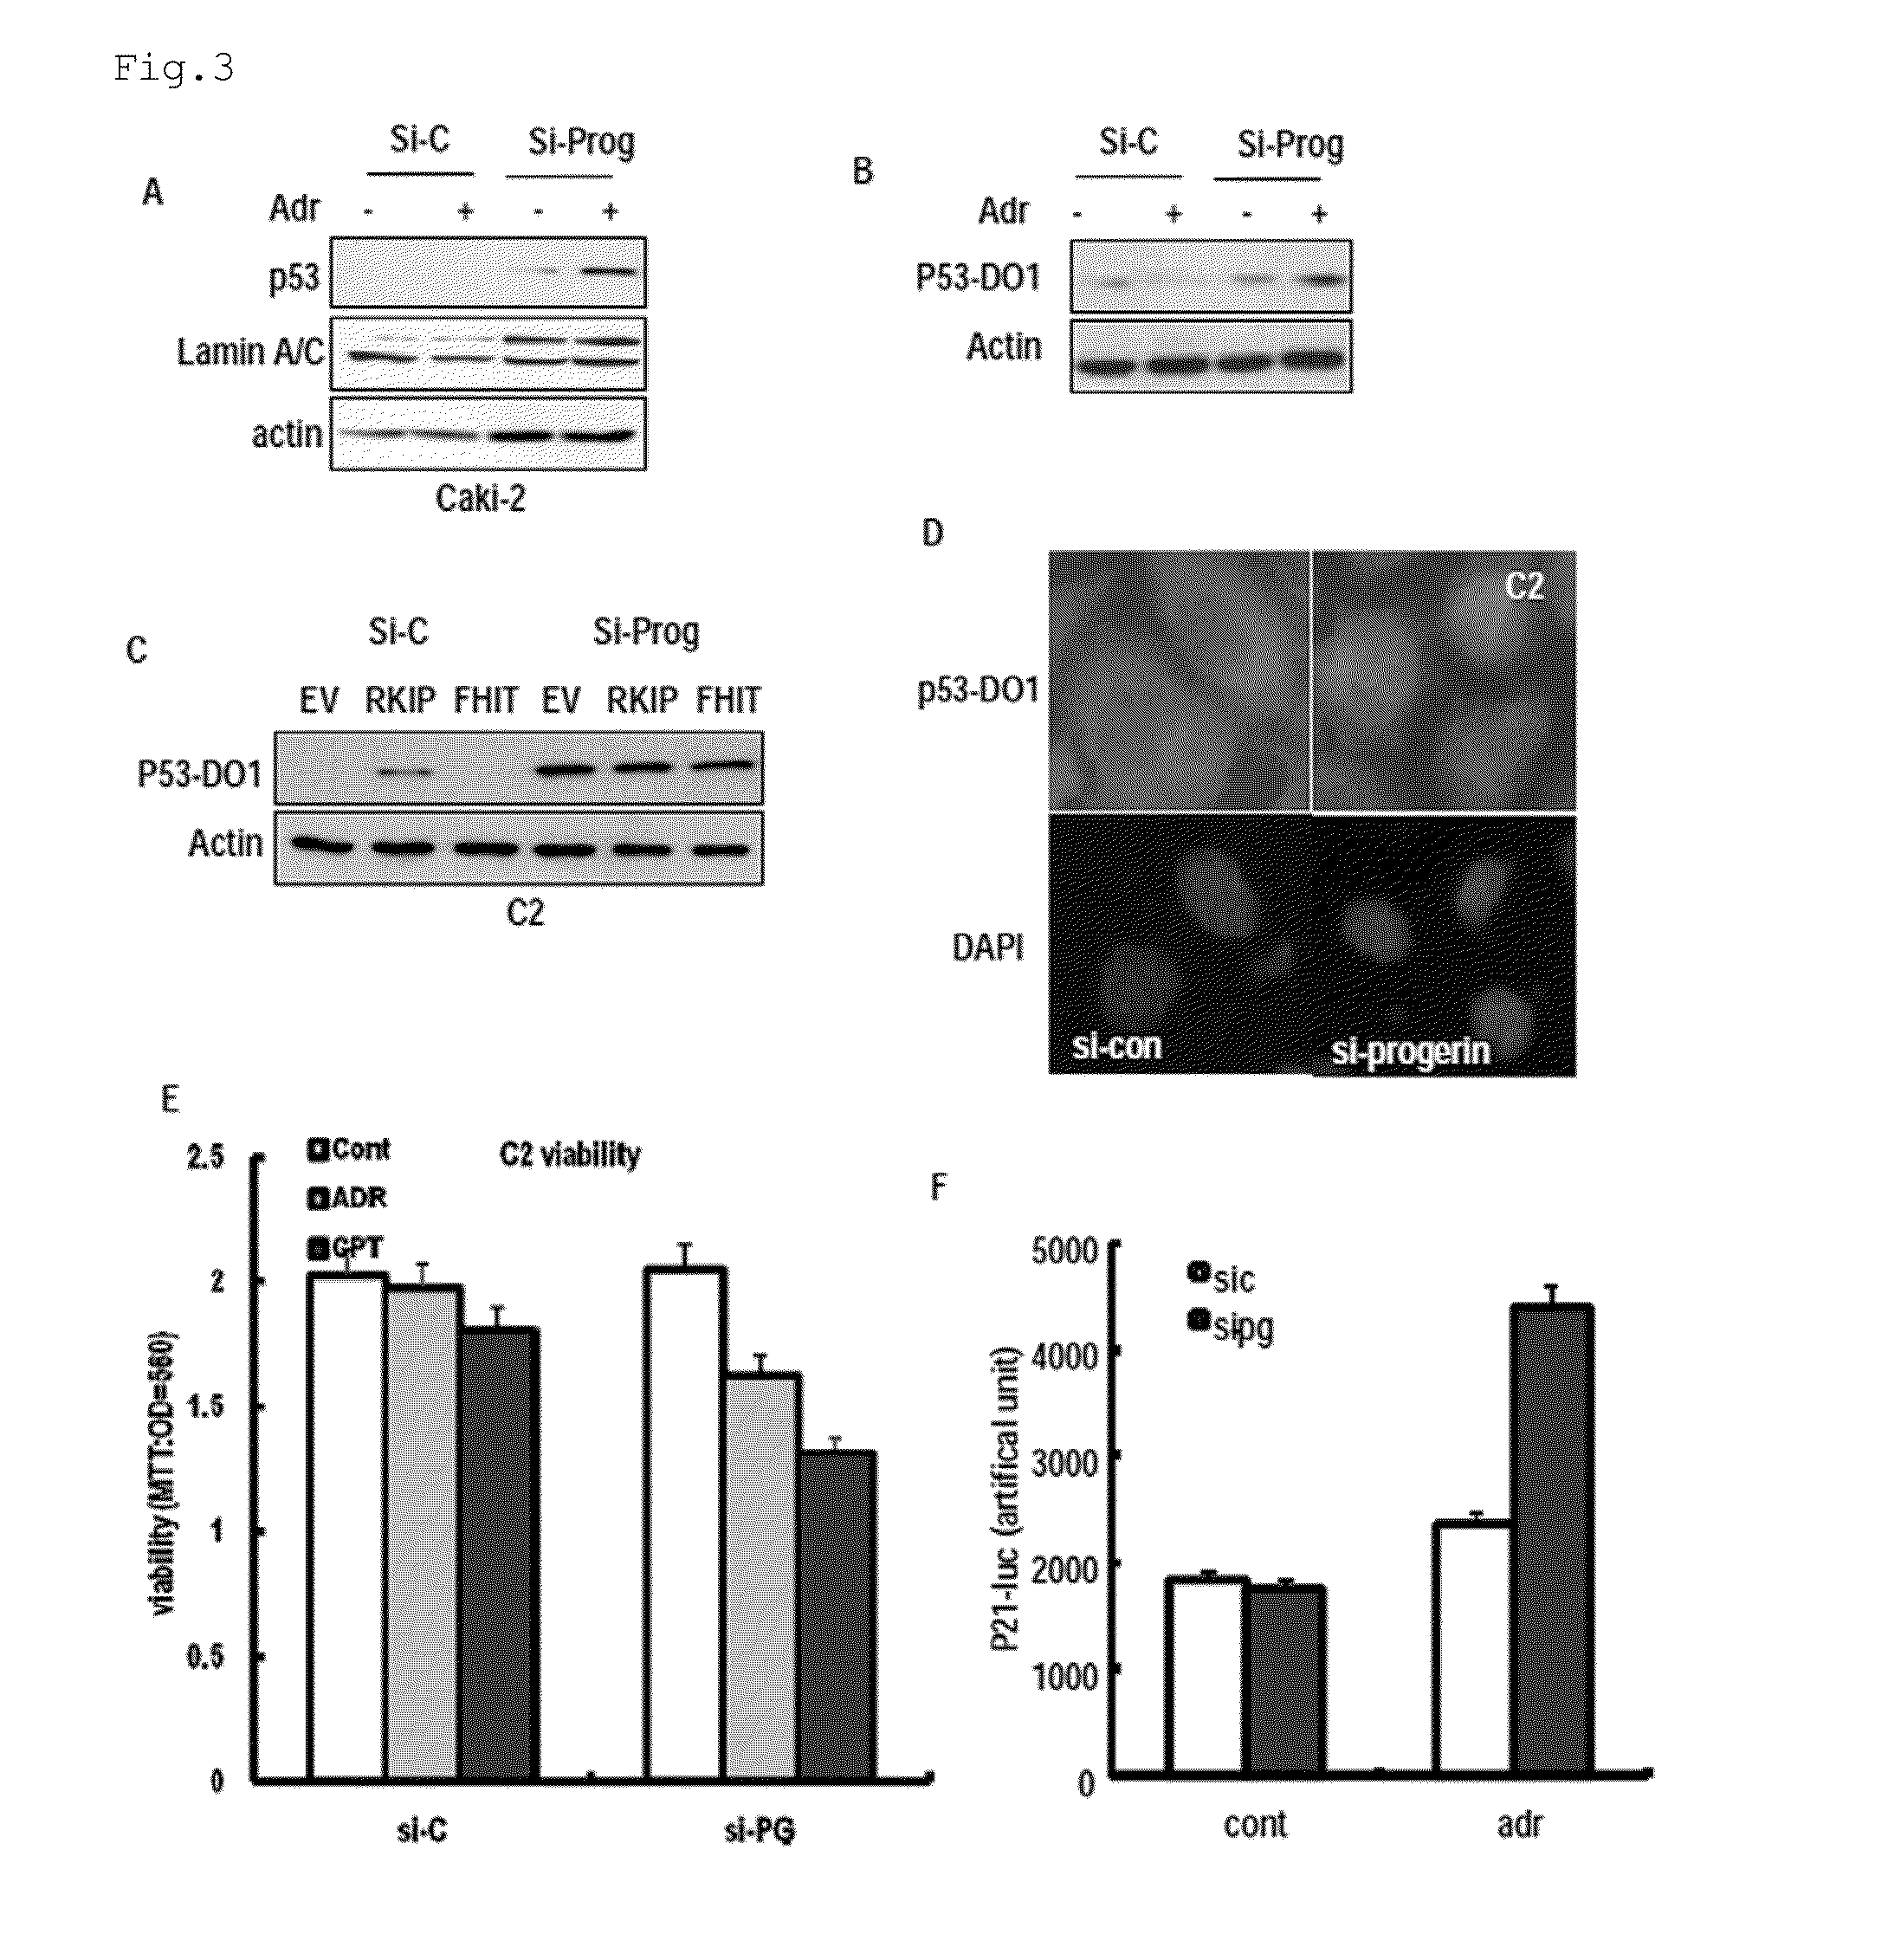 Pharmaceutical composition for treating aging-associated diseases, containing progerin expression inhibitor as active ingredient, and screening method of said progerin expression inhibitor